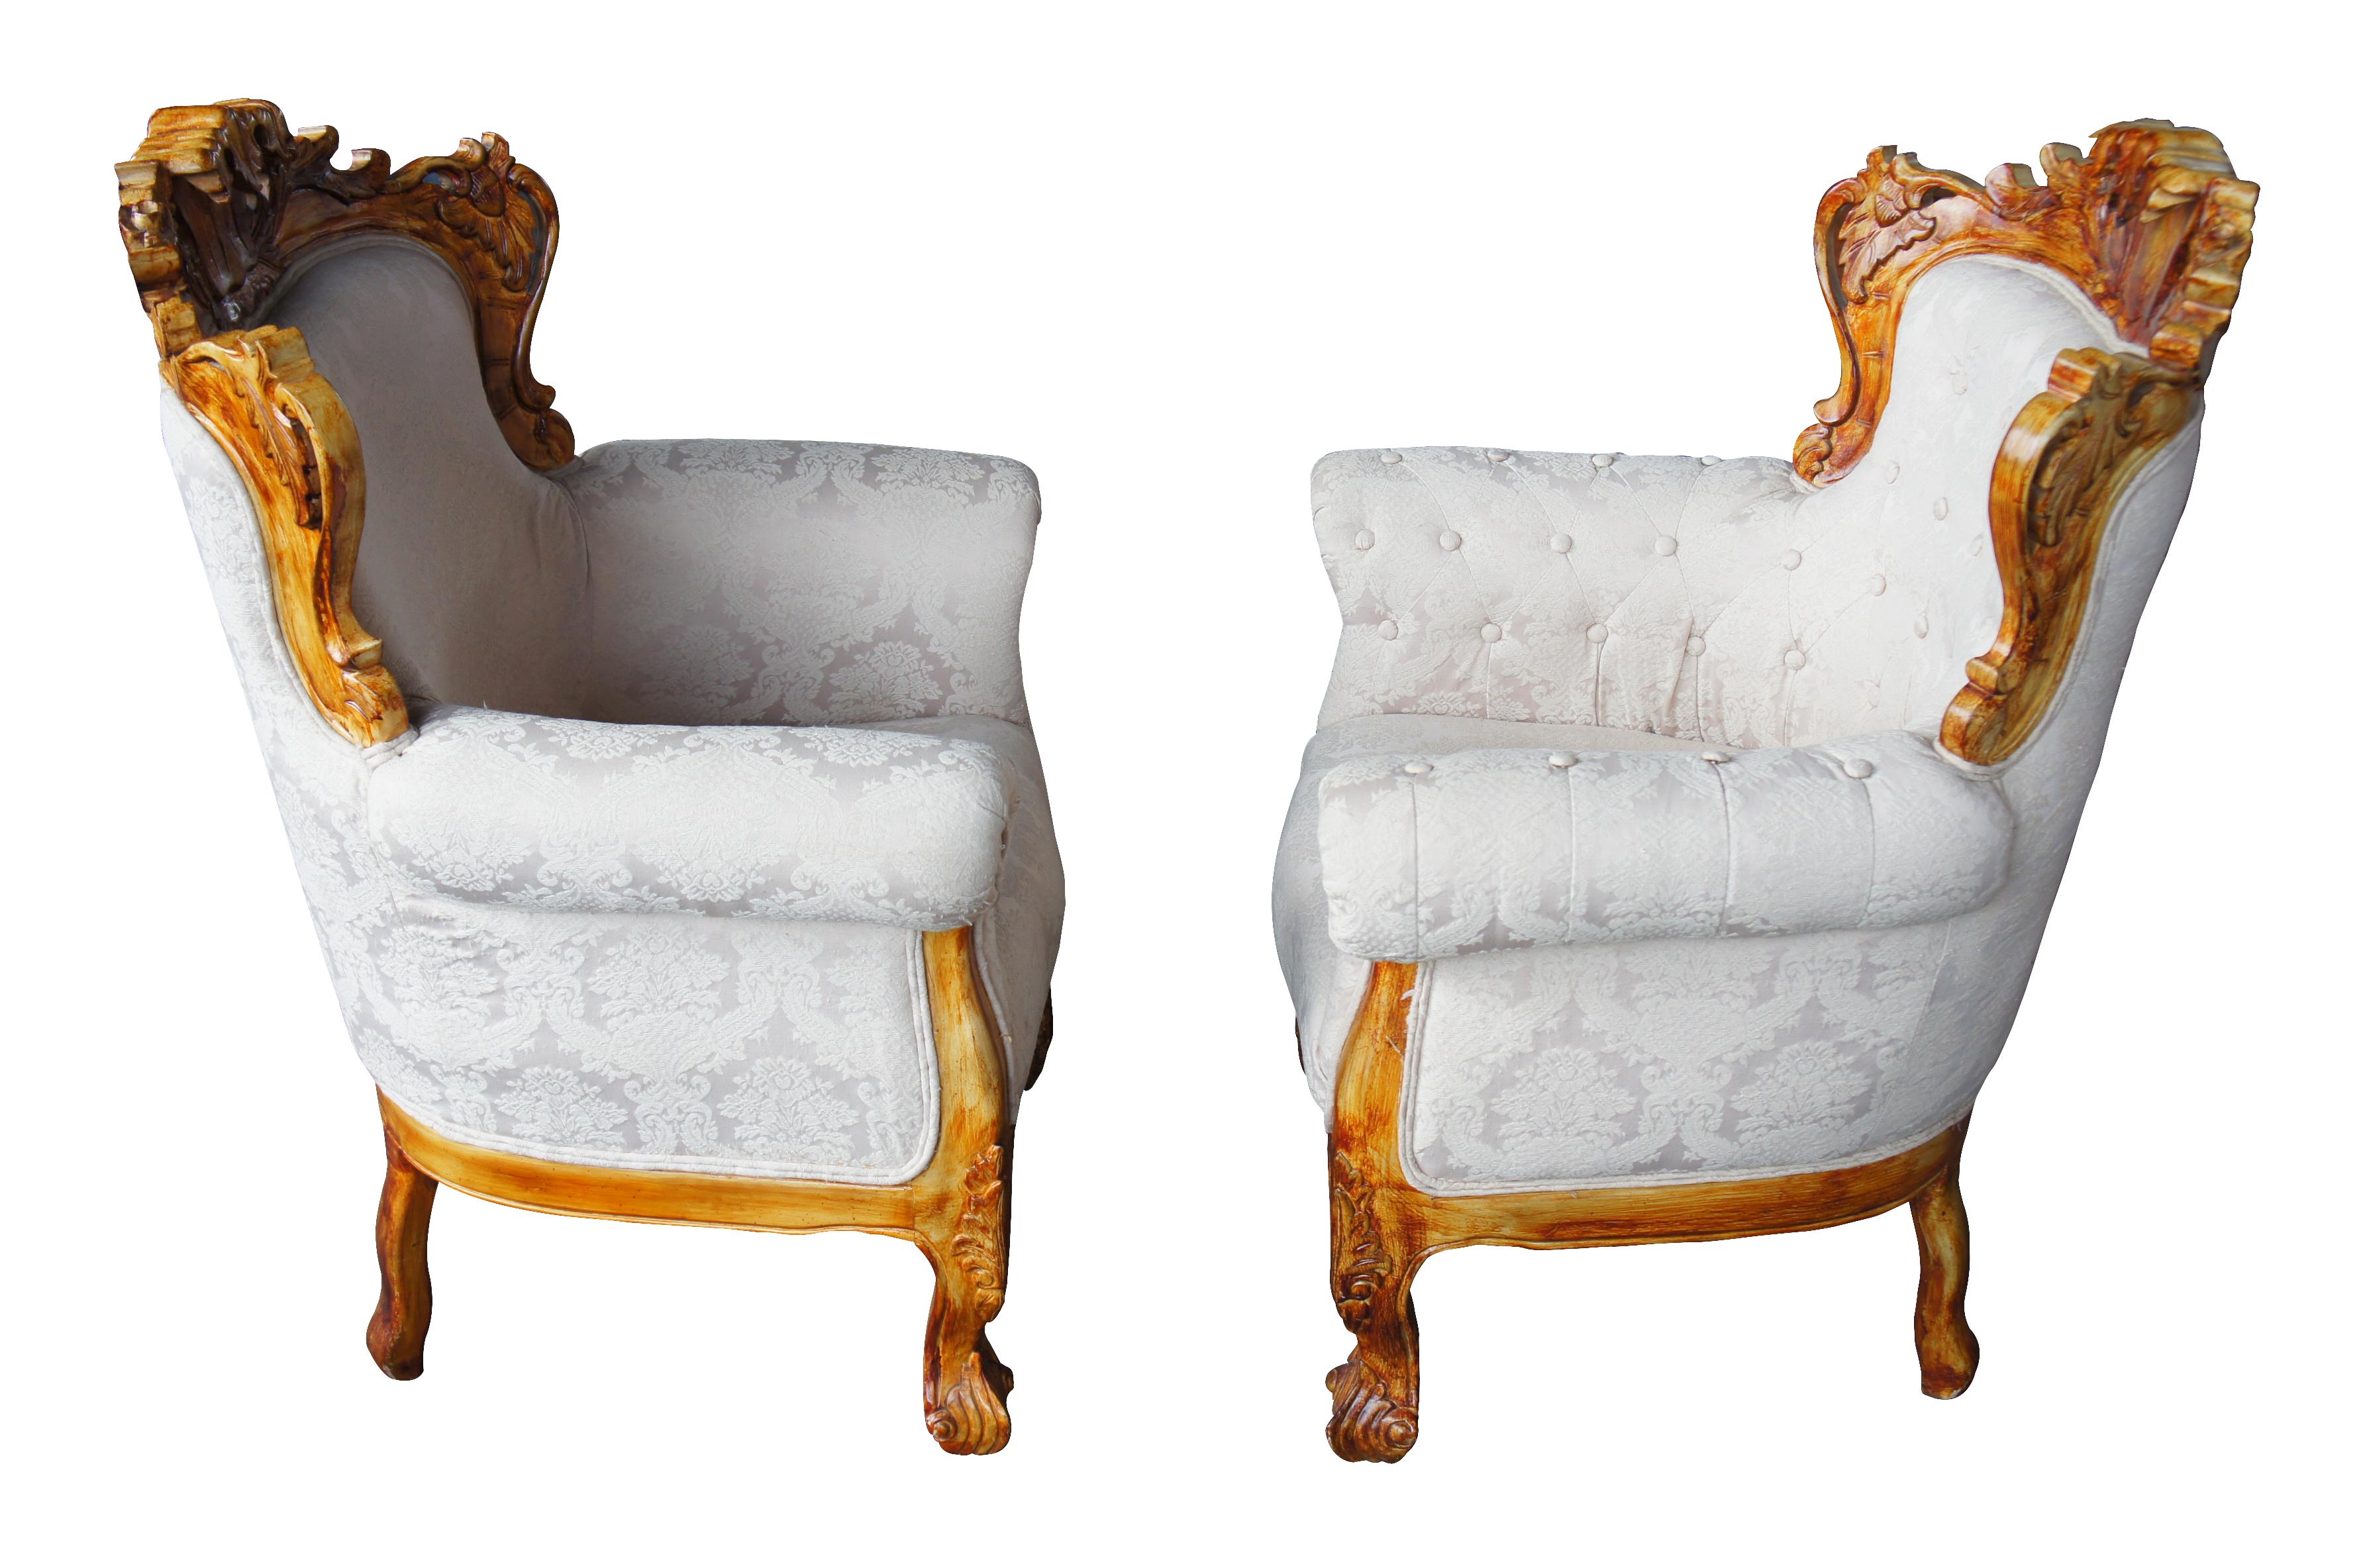 Antiqued Baroque Rococo high relief carved club chairs continental brocade seat

Exceptional Baroque Rococo designed club chairs. Features high relief scalloped floral carvings. Upholstered in a brocade fabric. Both chairs have the same fabric,